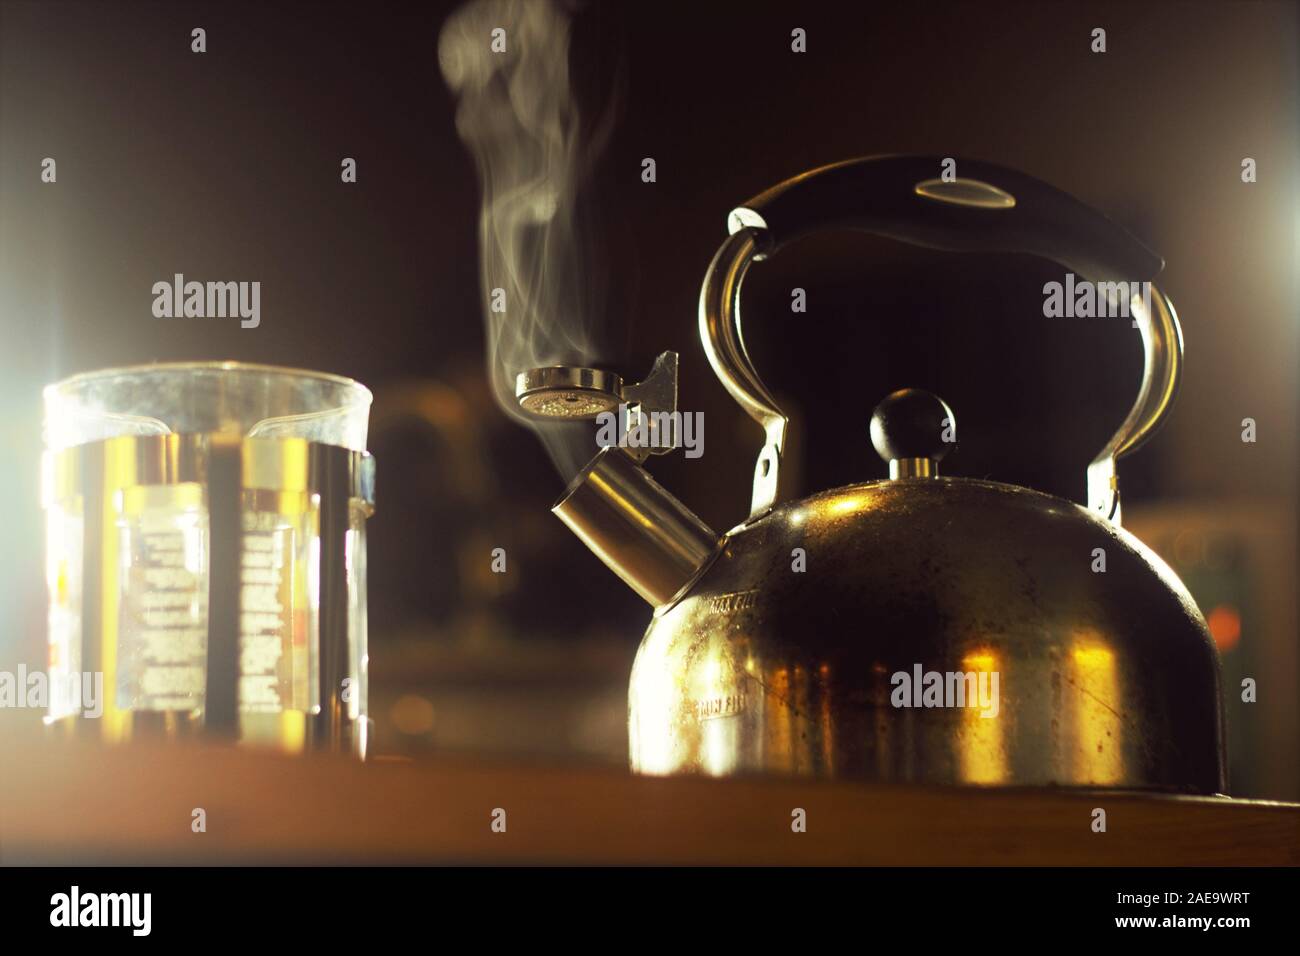 Low Angle Shot of Steaming Kettle with French Press Coffee Maker Stock Photo